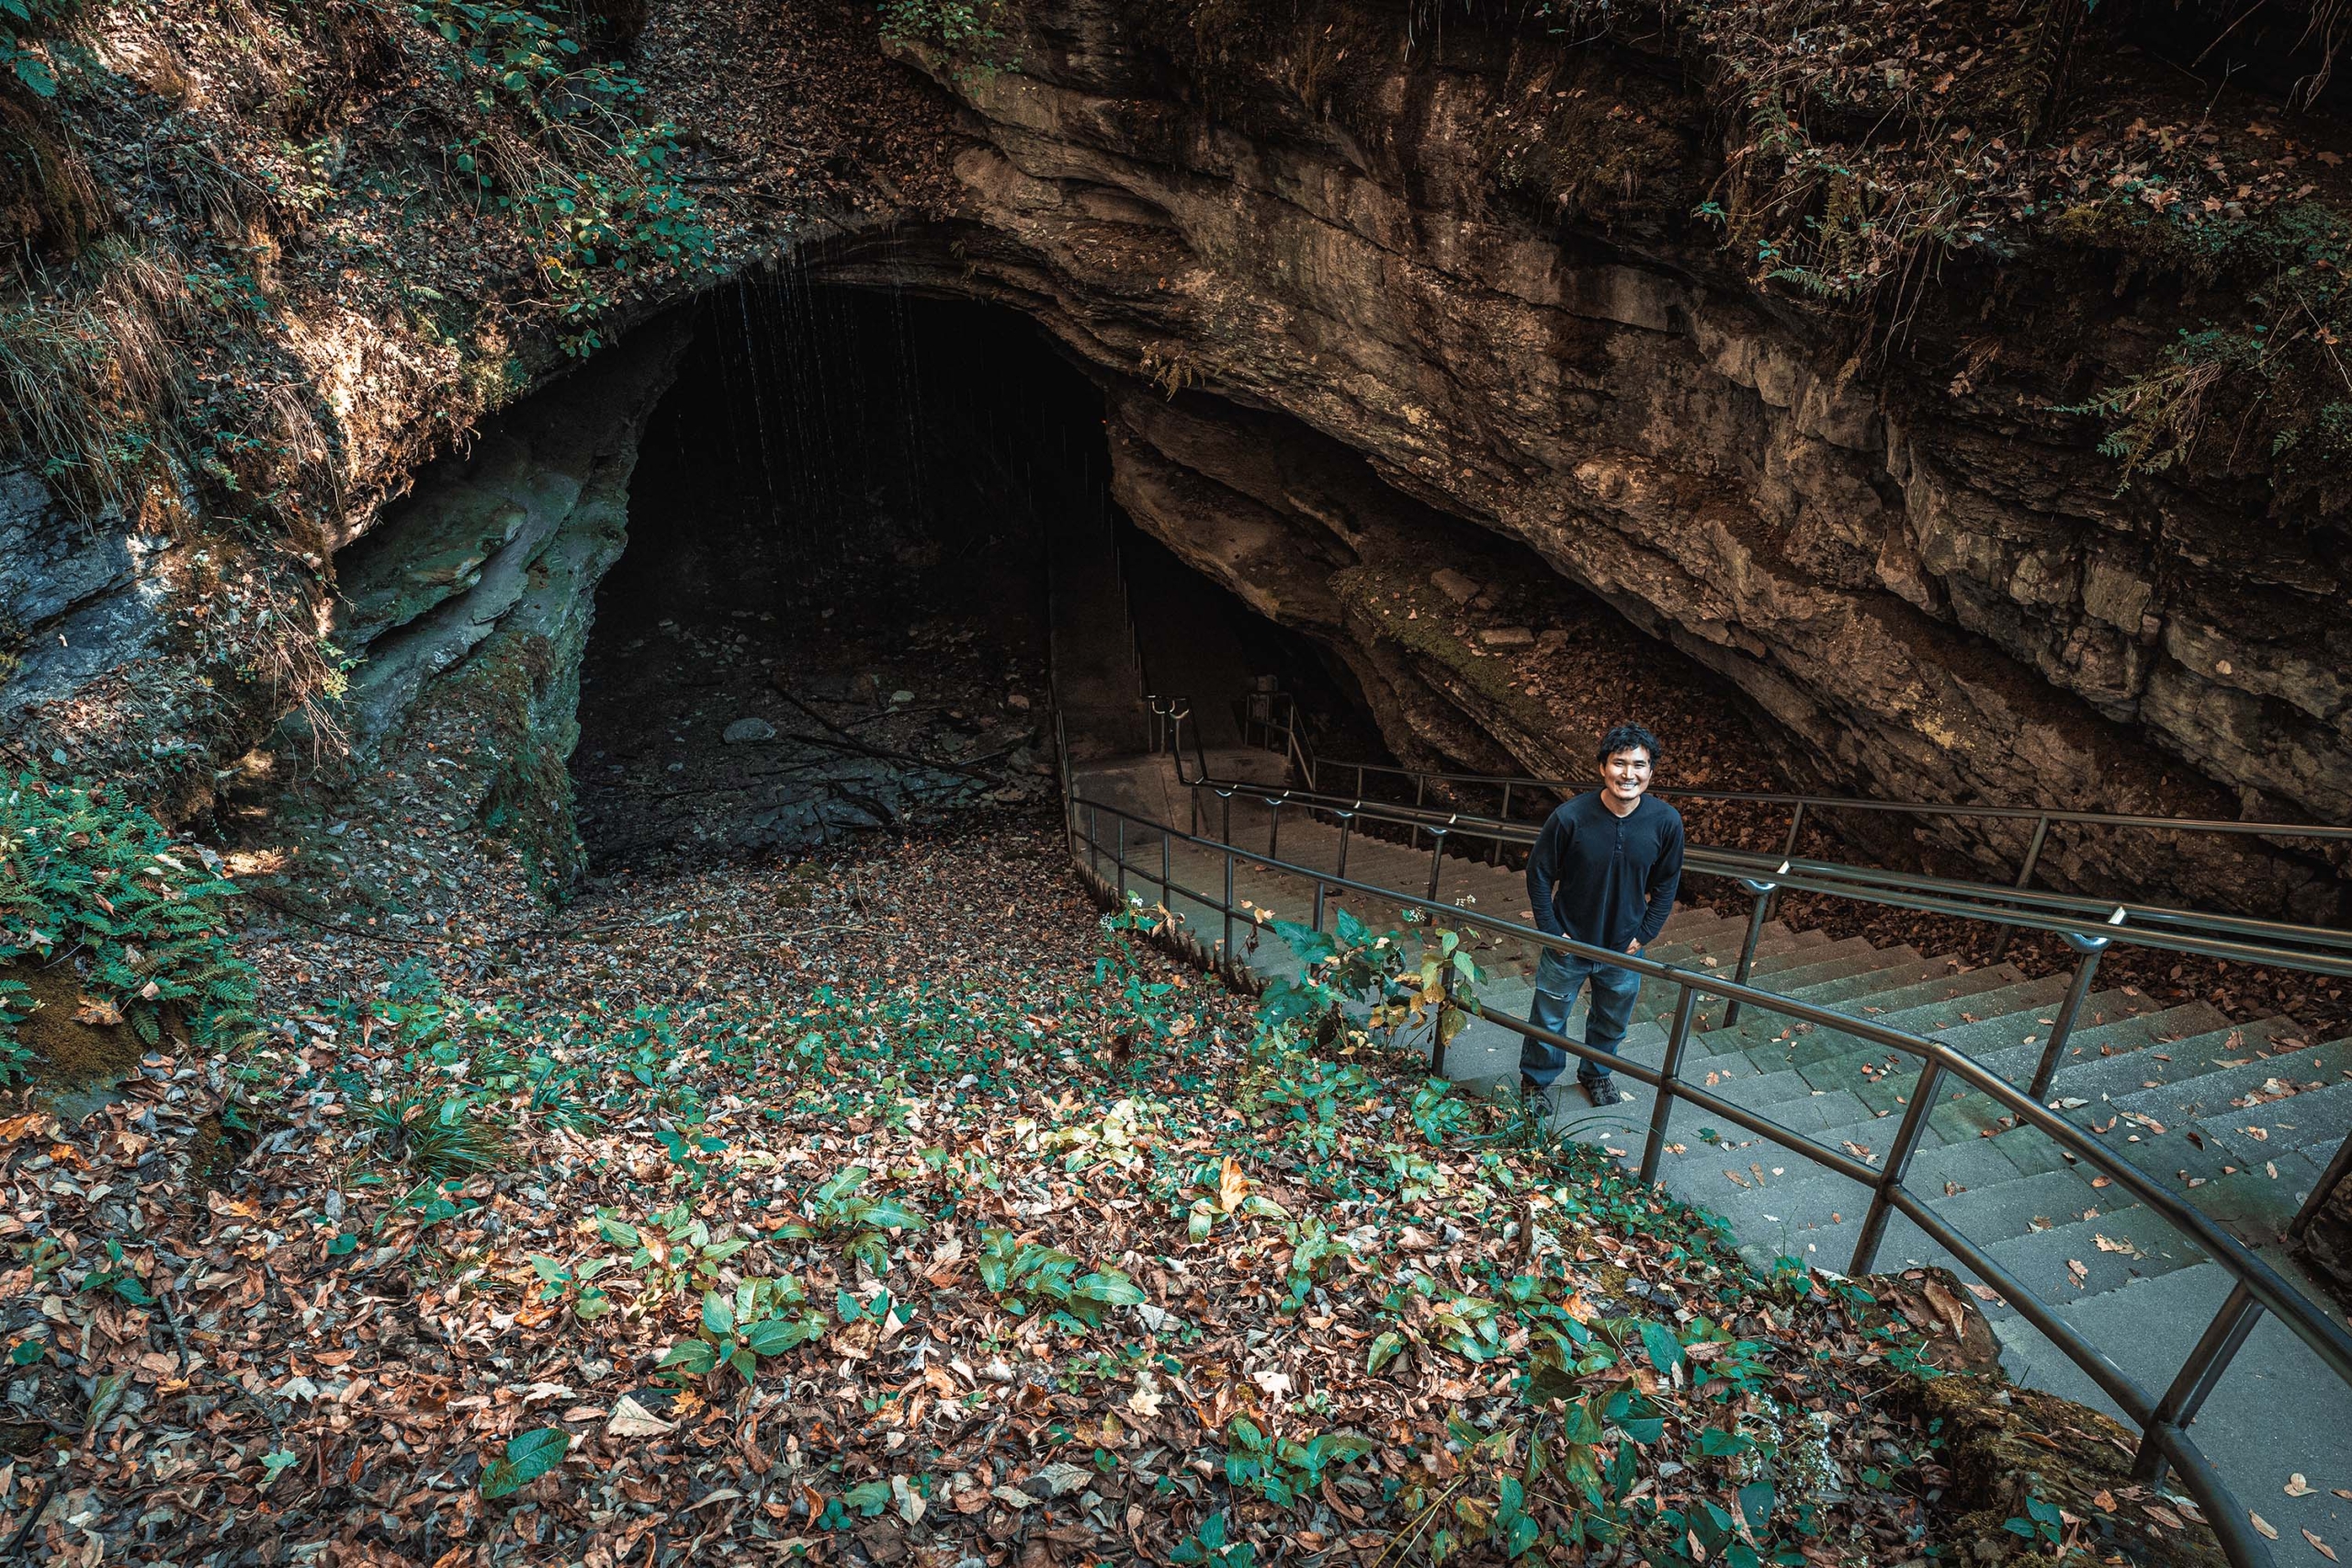 Ace and Mammoth Cave, Mammoth Cave National Park, Kentucky, United States 3000 x 2000